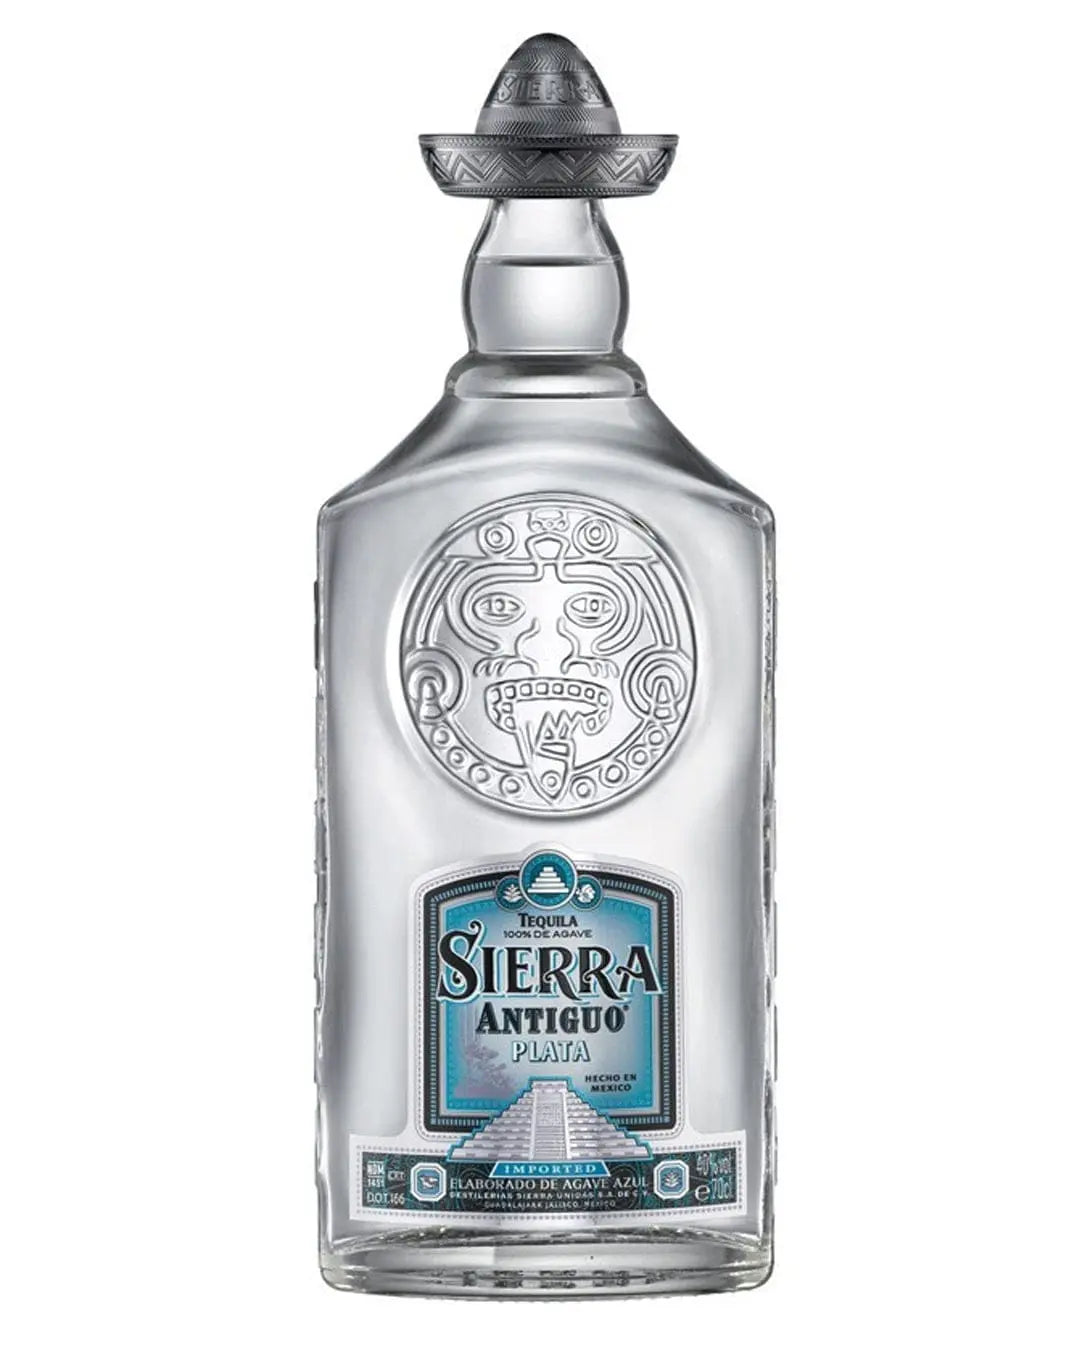 Sierra Antiguo Plata 100% Agave Tequila, 70 cl Tequila & Mezcal 4062400544207